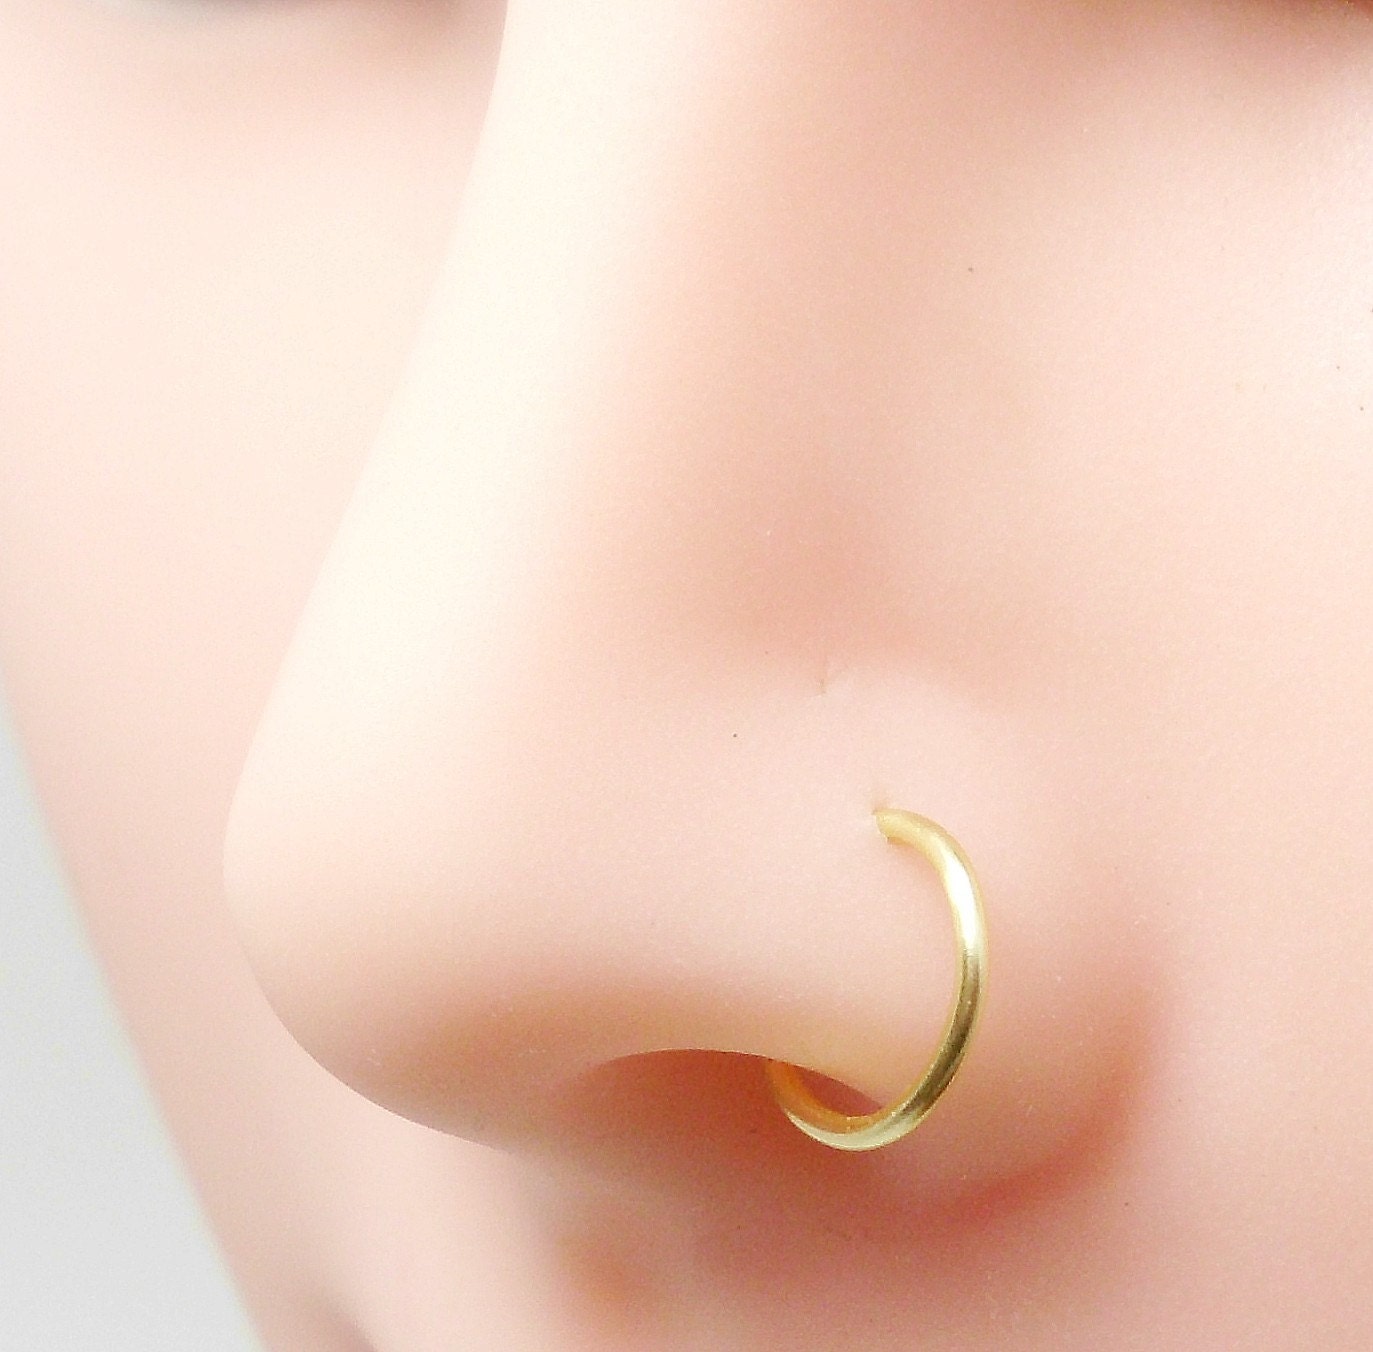 Nose Hoop Nose Ring-small Gold Nose Hoop-nose Ring - Etsy